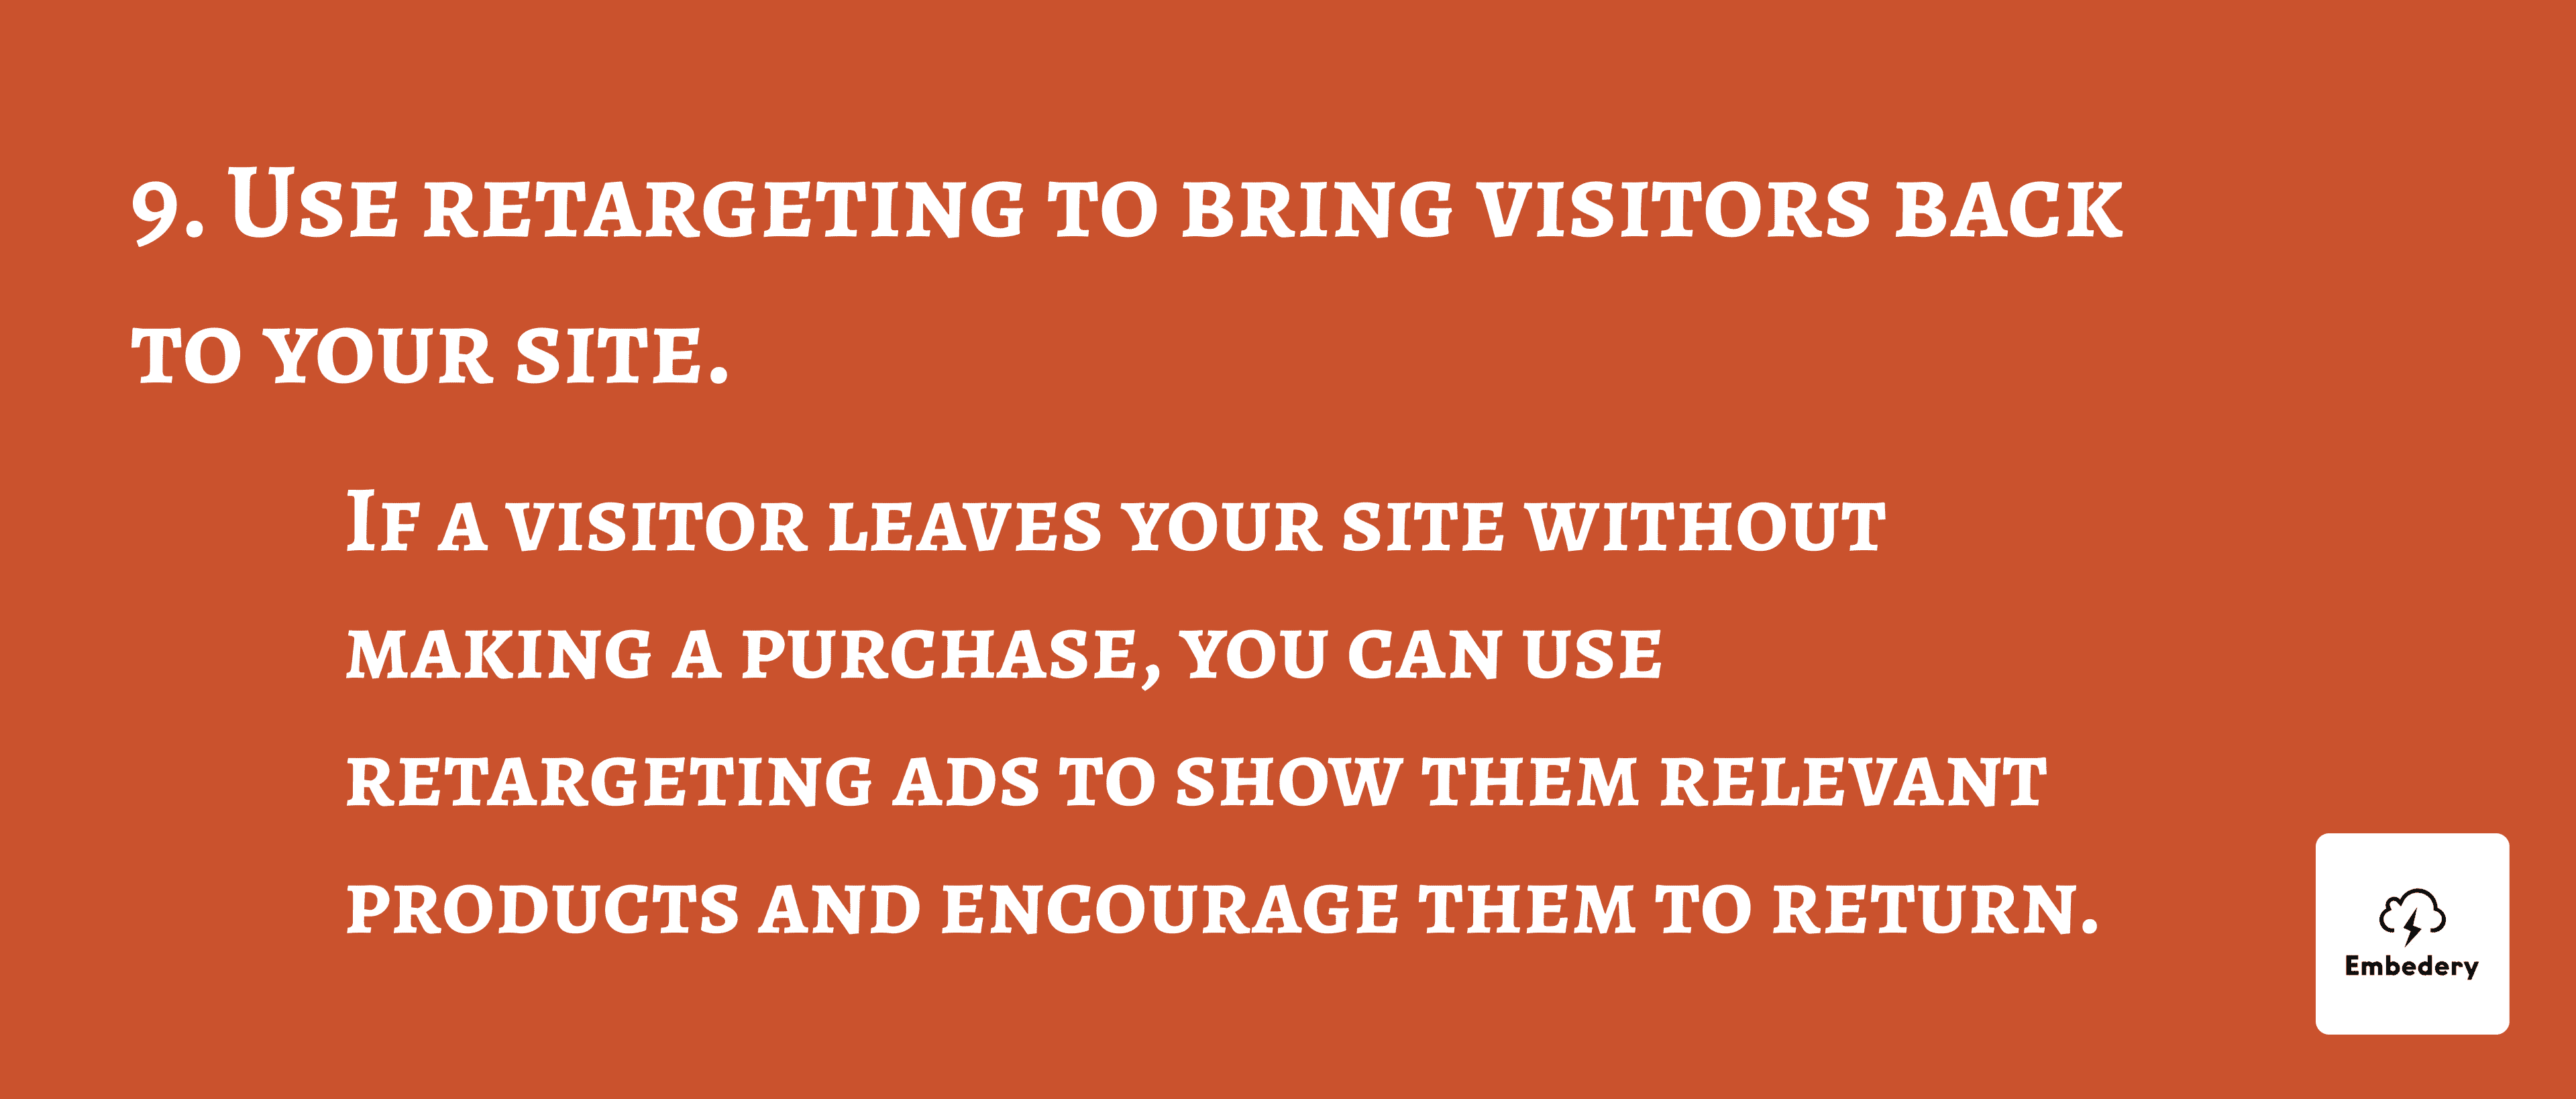 Use retargeting to bring visitors back to your site